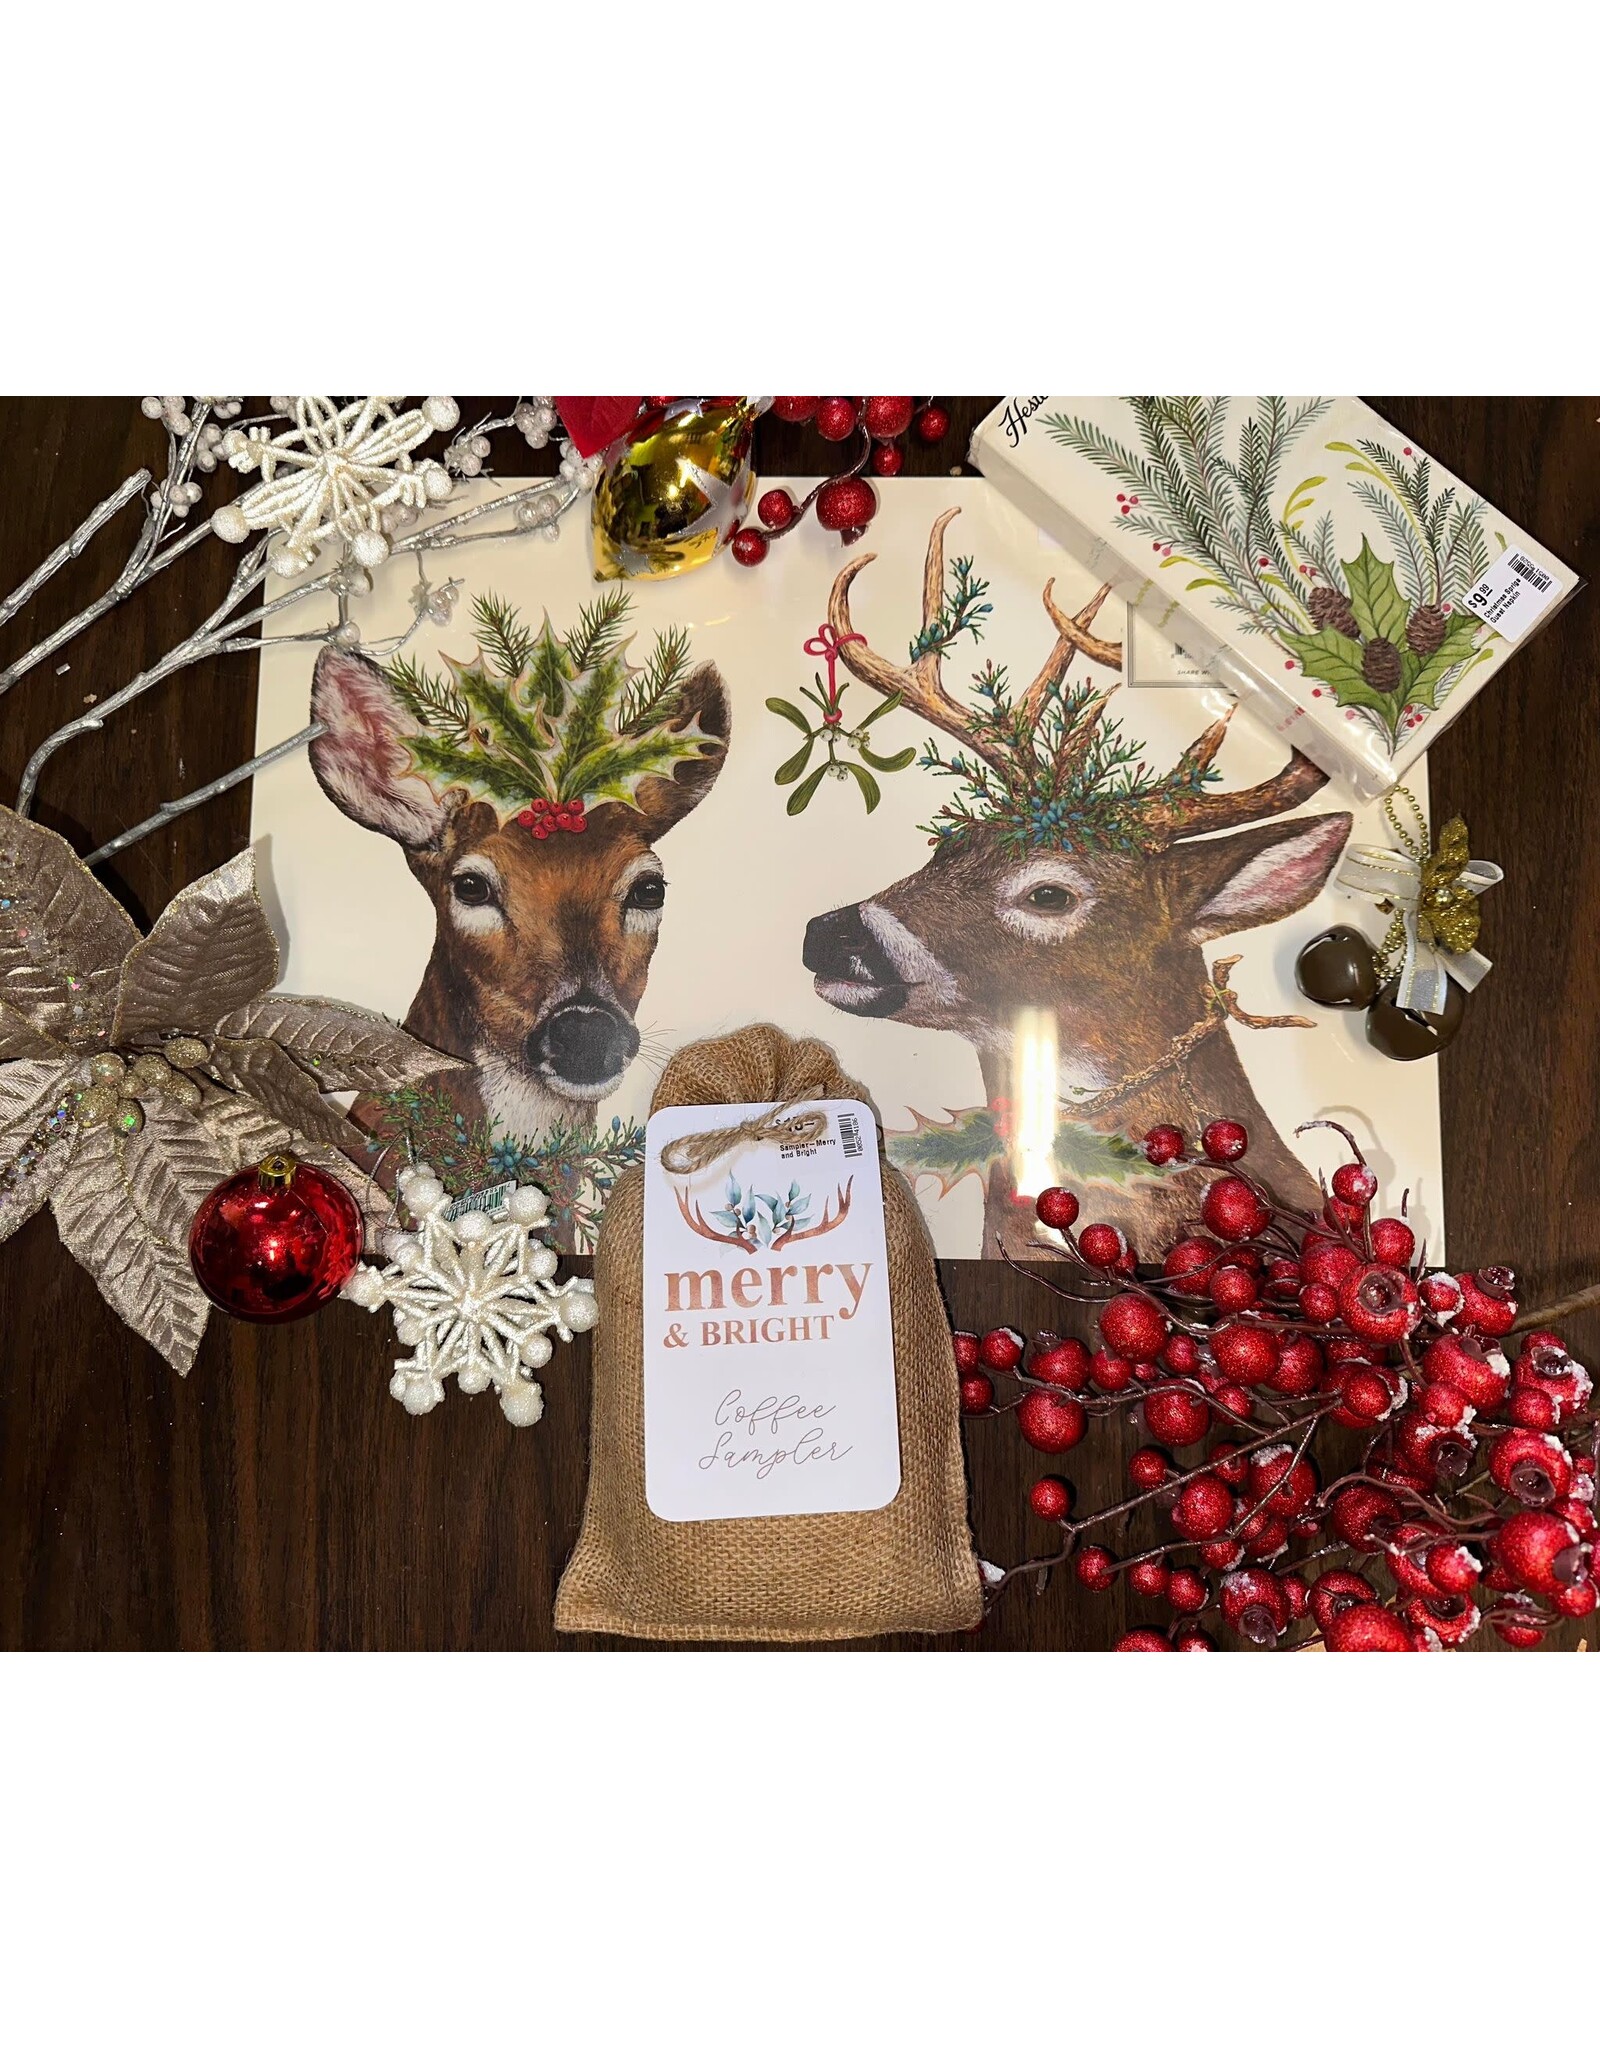 Coffee Sampler-Merry and Bright